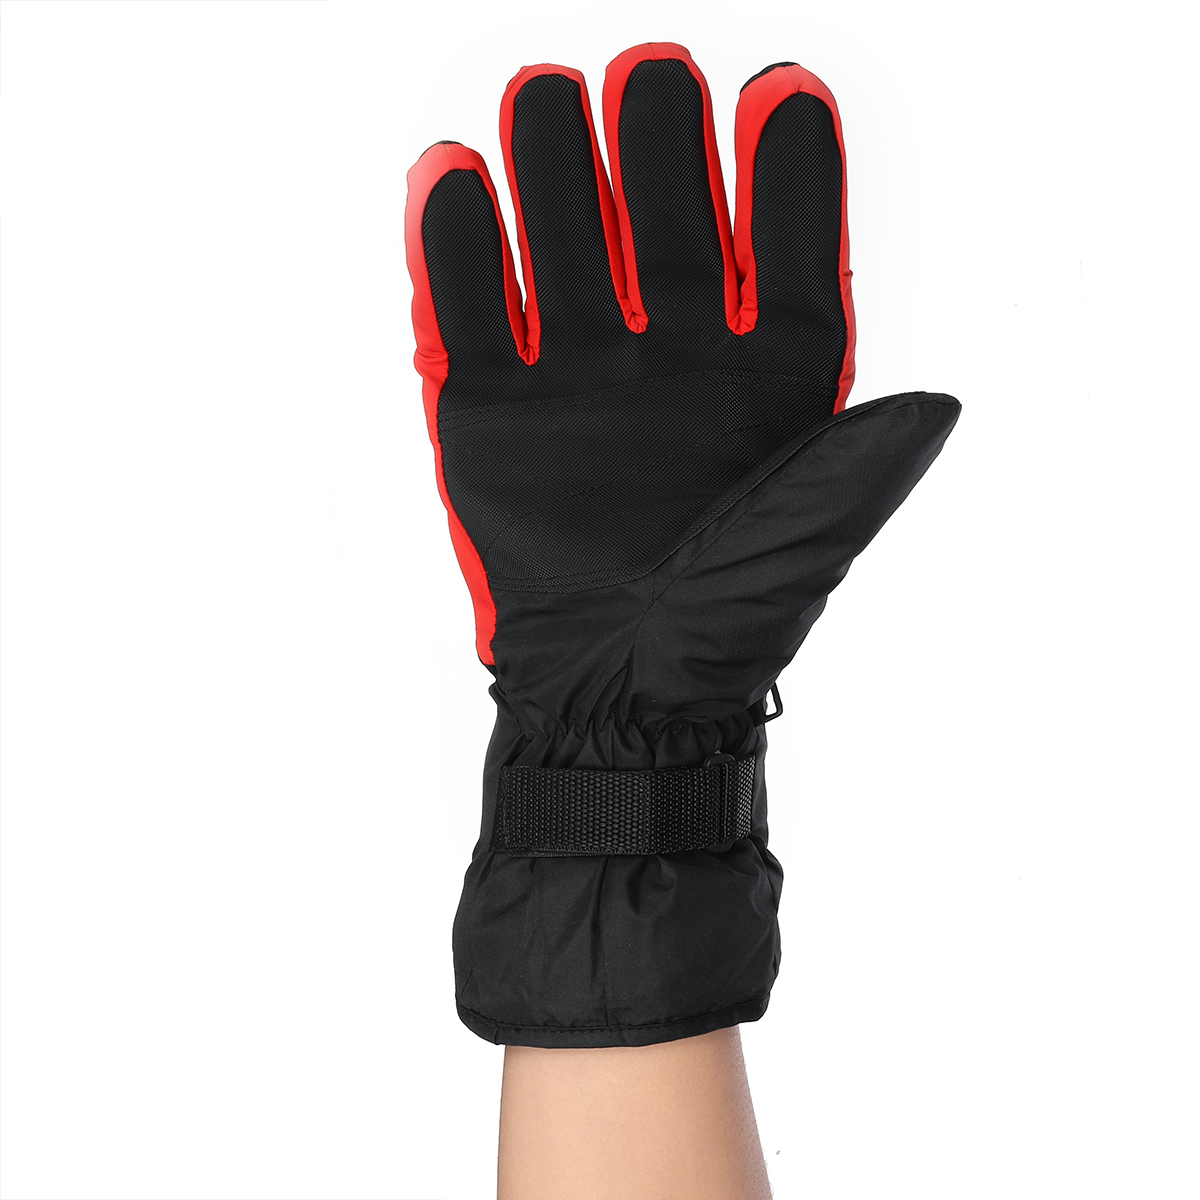 45V-Smart-Electric-Heated-Gloves-Winter-Ski-Cycling-Keep-Warm-Battery-Powered-Heating-Gloves-5-Finge-1771505-8